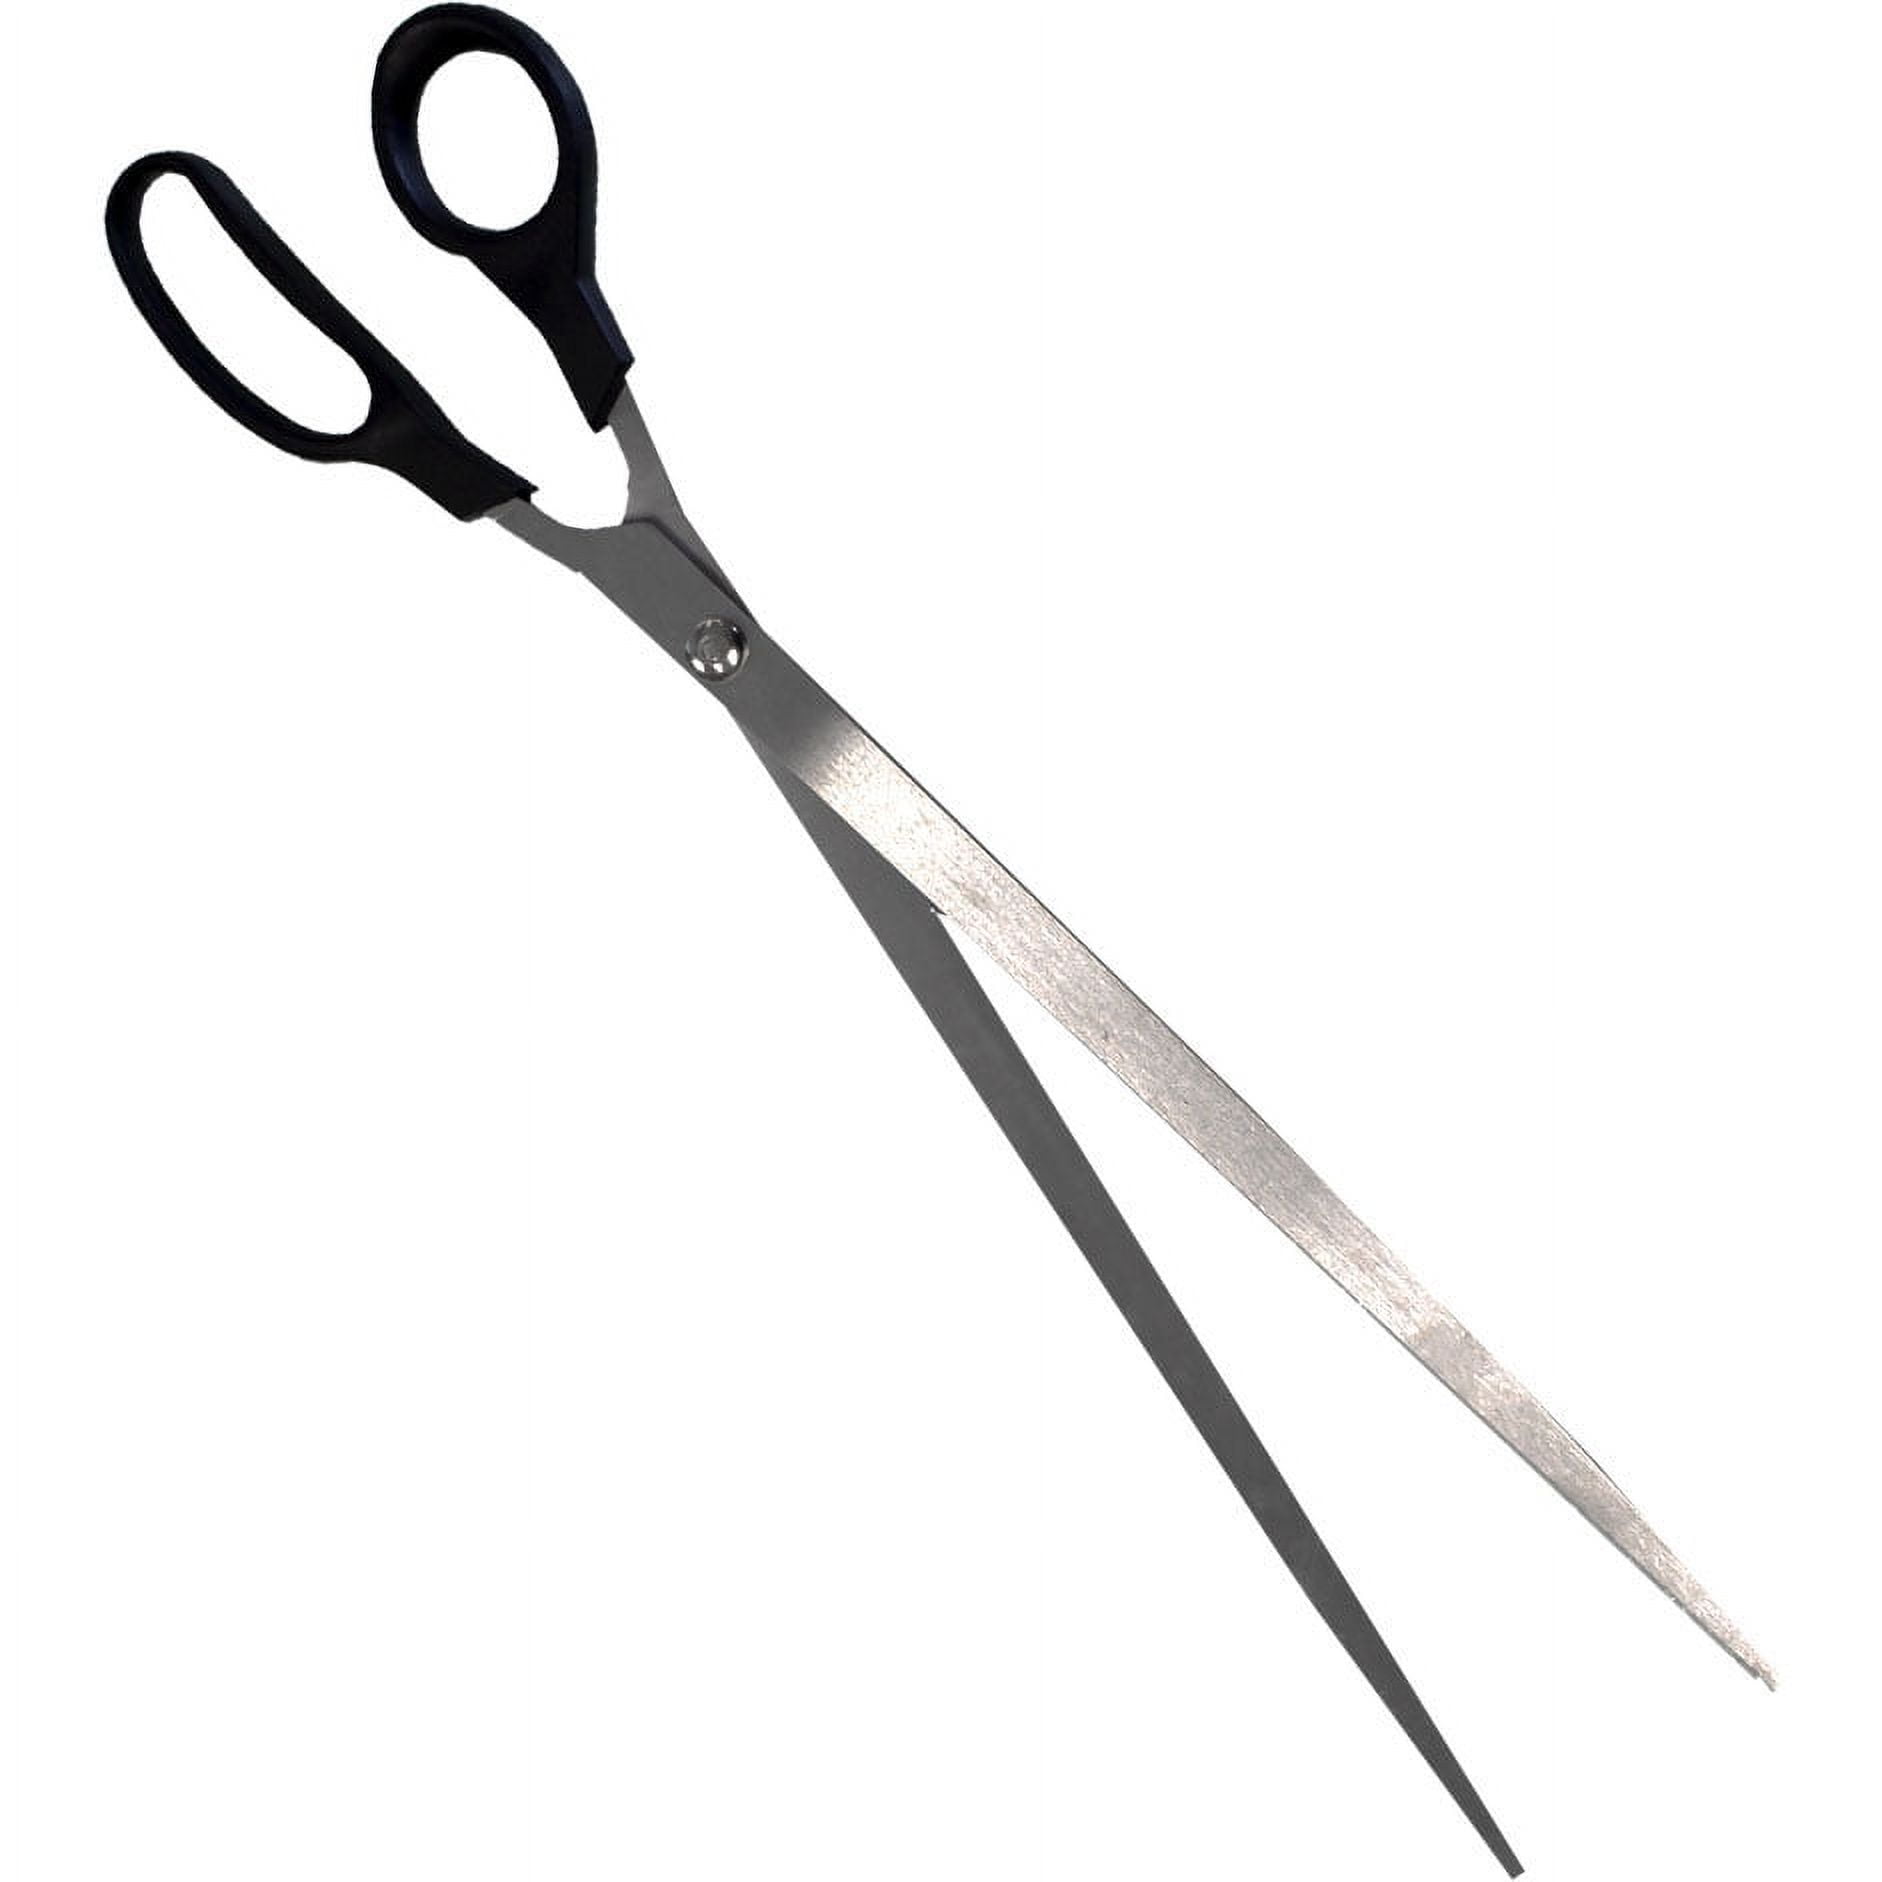 The Best Scissors for Cutting and Trimming Paper –